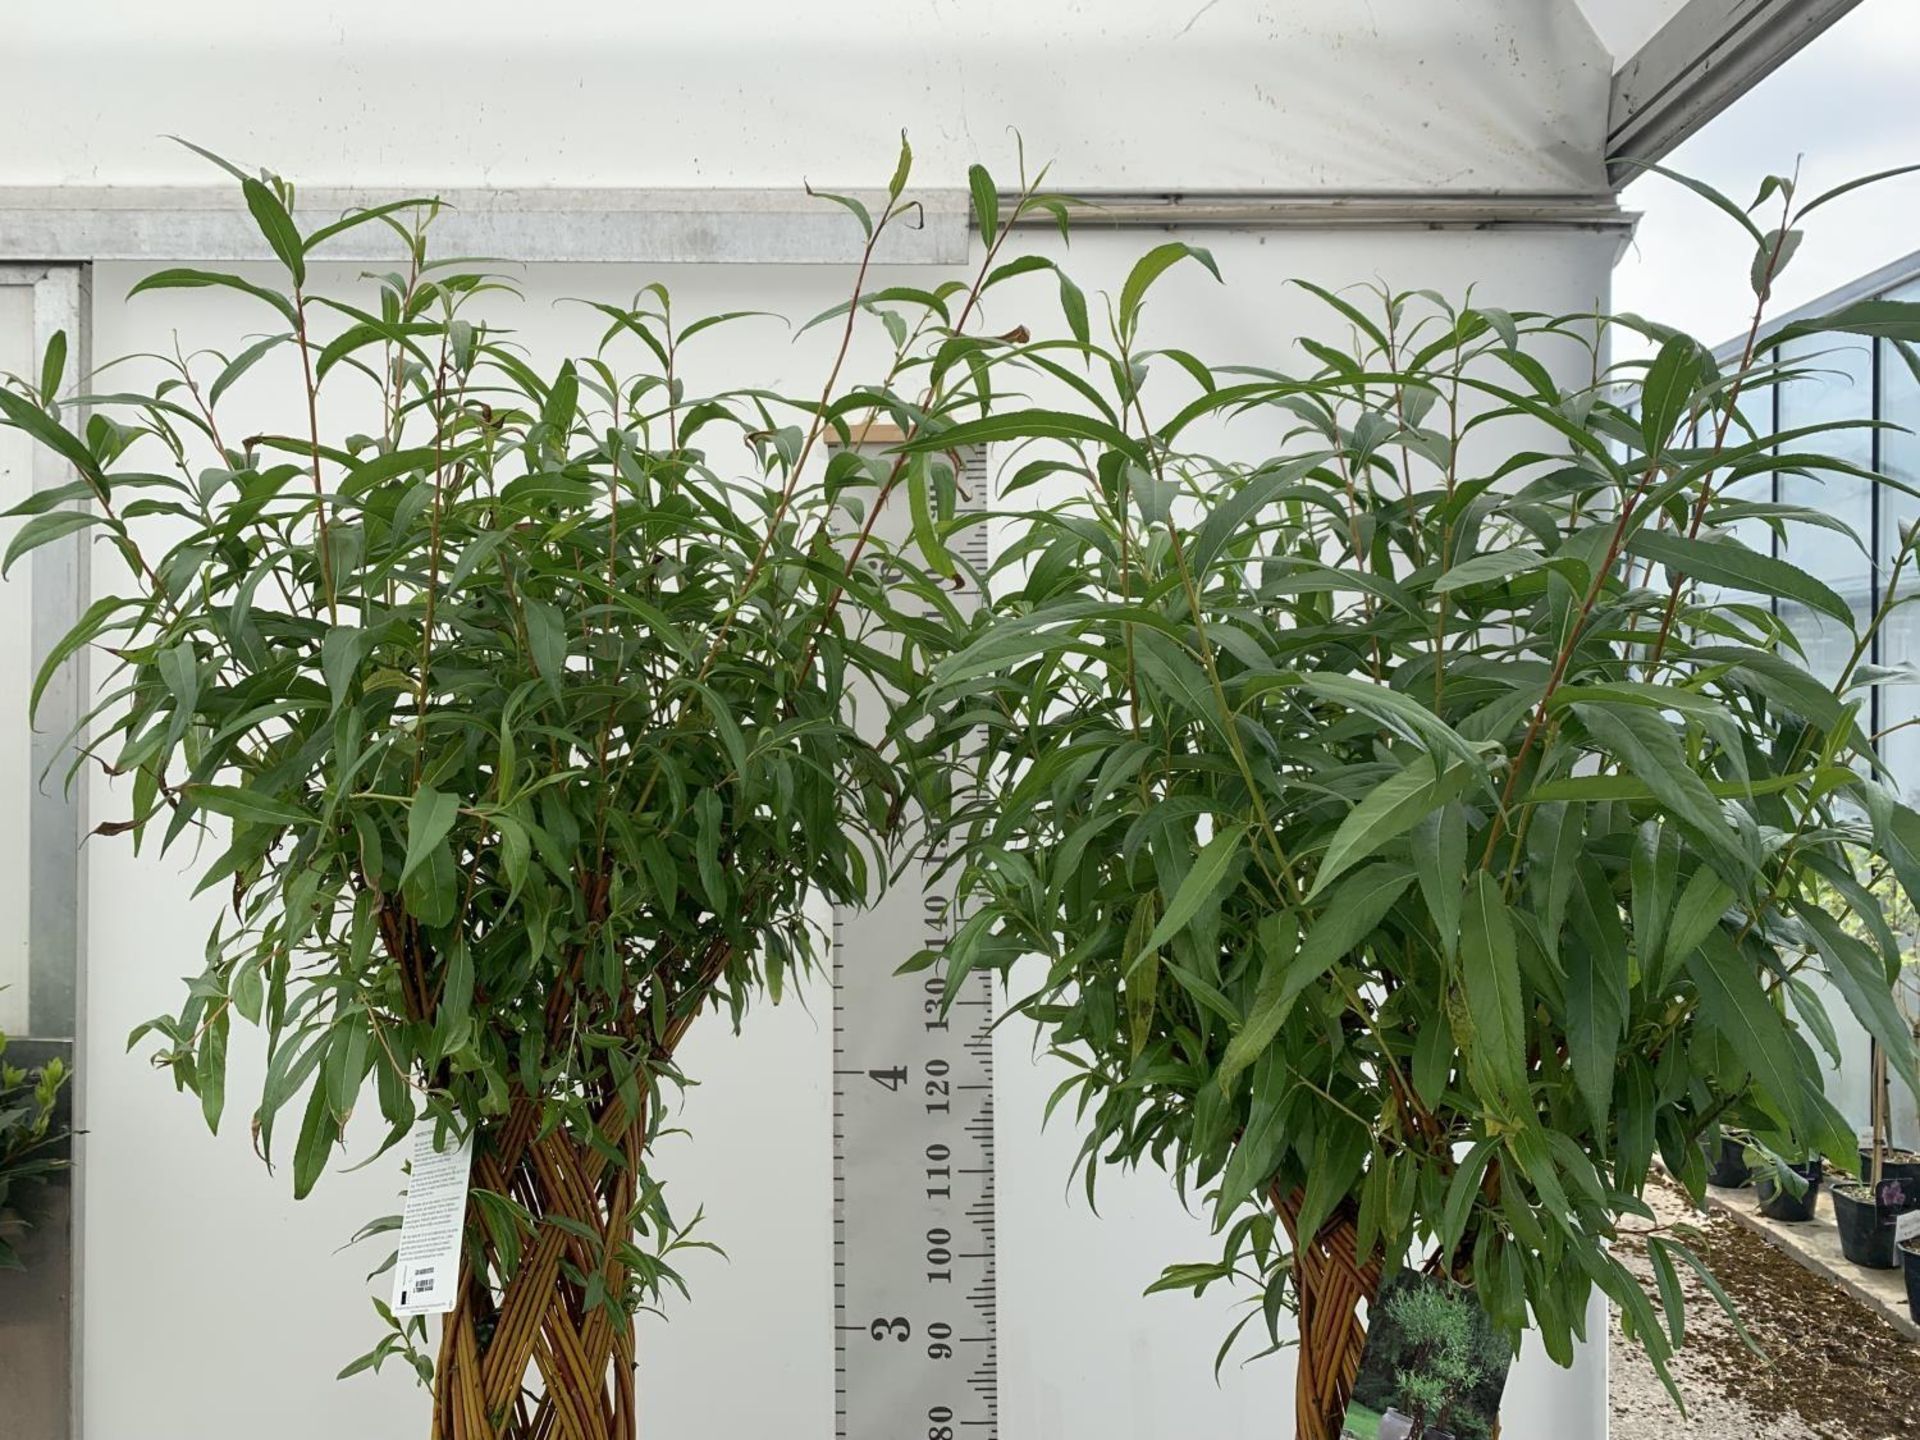 TWO SALIX LIVING WILLOW TREES IN 7.5 LTR POTS OVER 2 METRES IN HEIGHT TO BE SOLD FOR THE TWO PLUS - Image 8 of 22